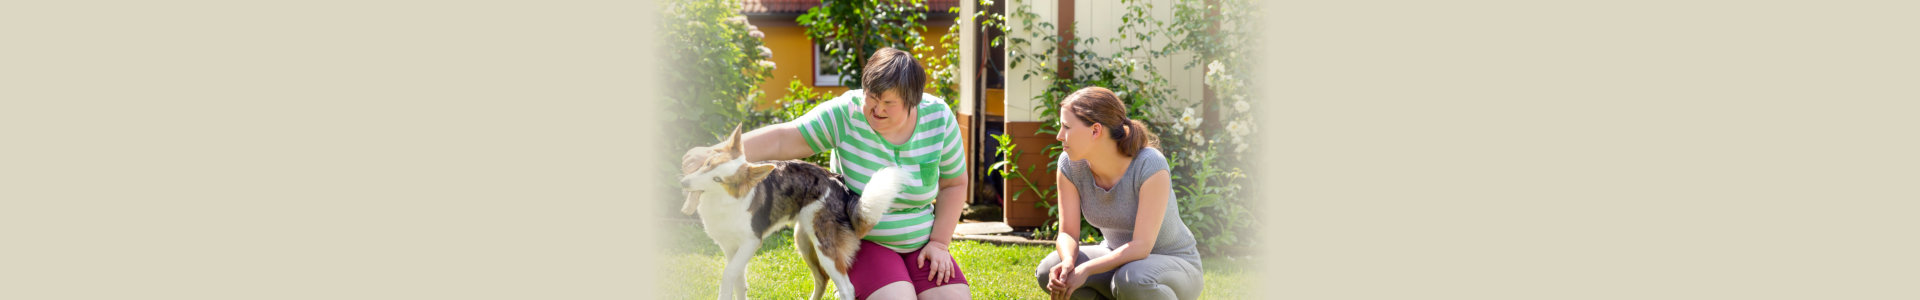 mentally disabled woman with a second woman and a companion dog, concept learning by animal assisted living